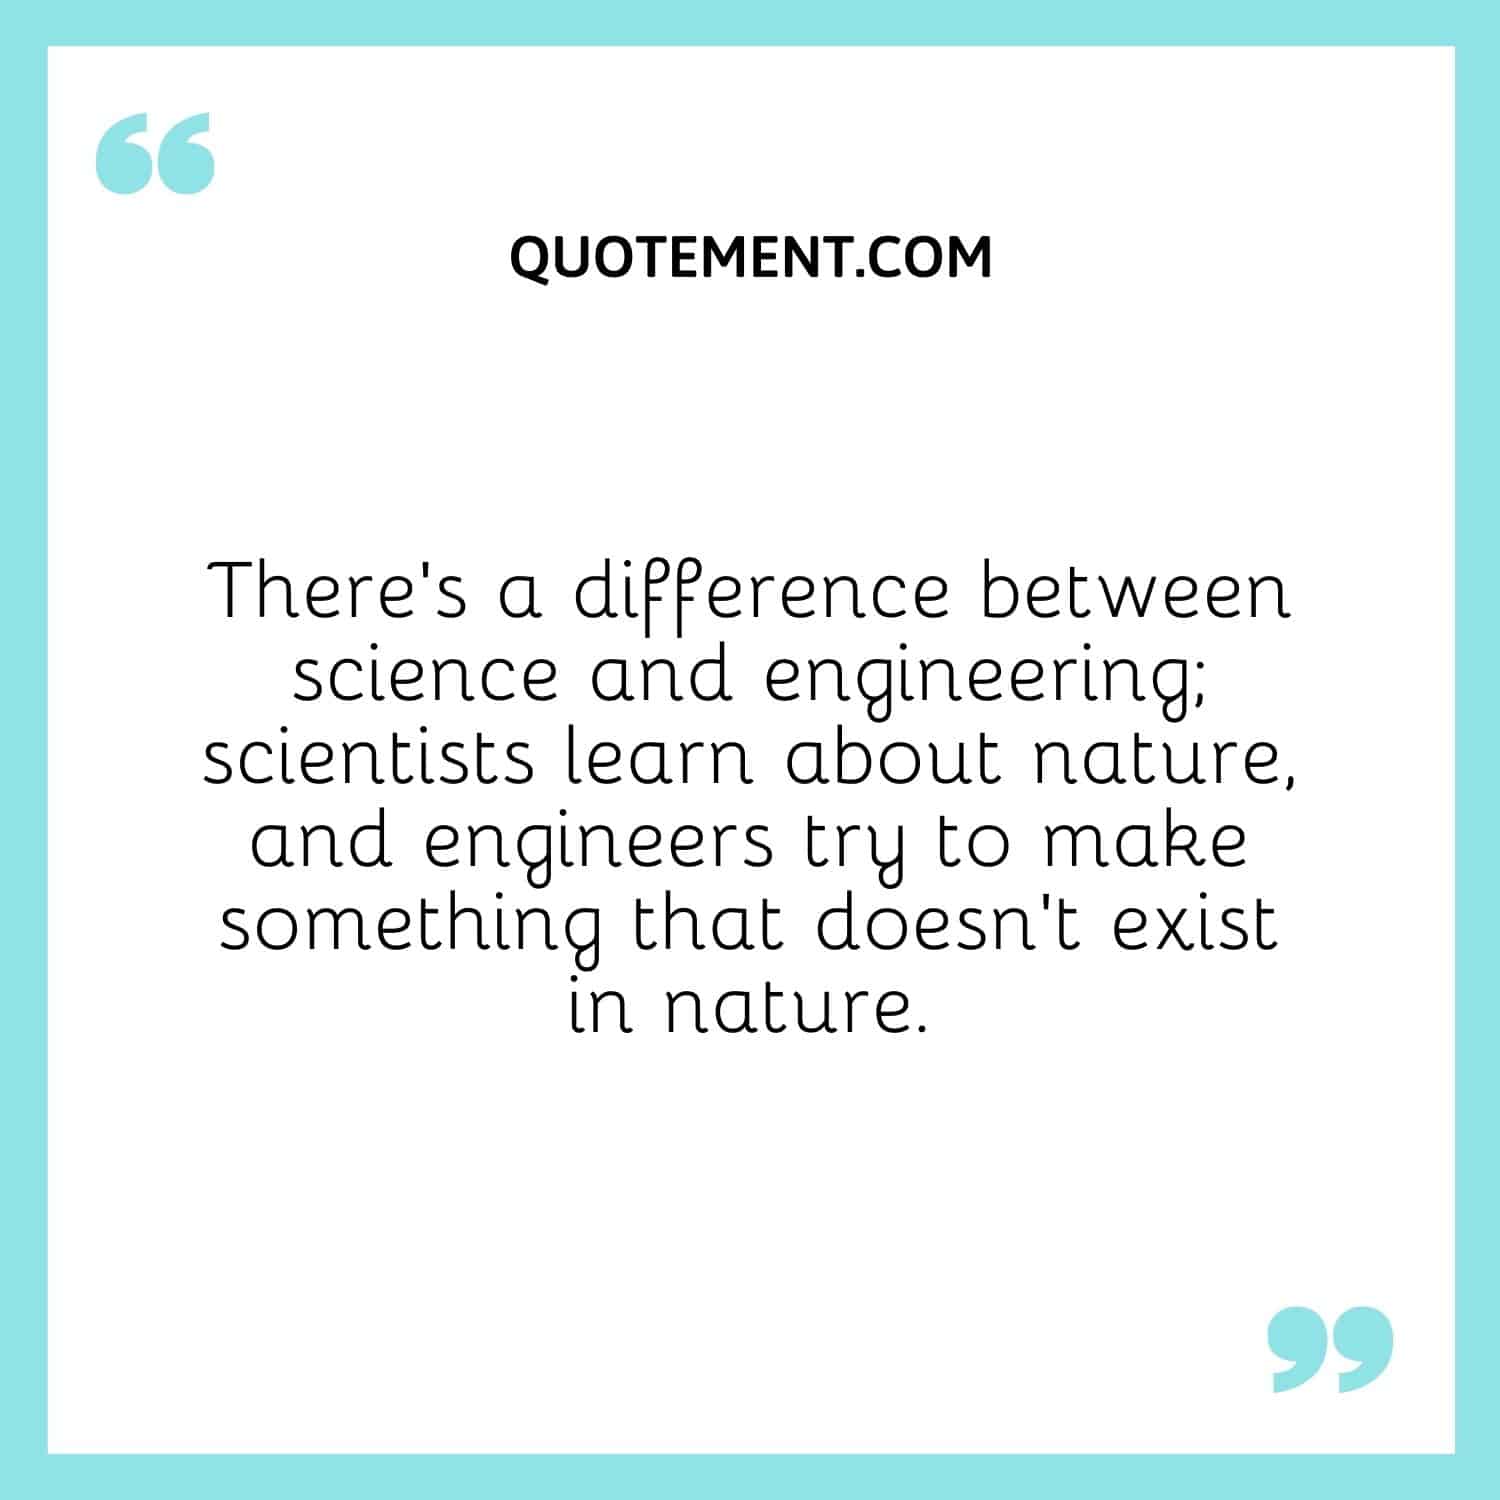 There’s a difference between science and engineering; scientists learn about nature, and engineers try to make something that doesn’t exist in nature.